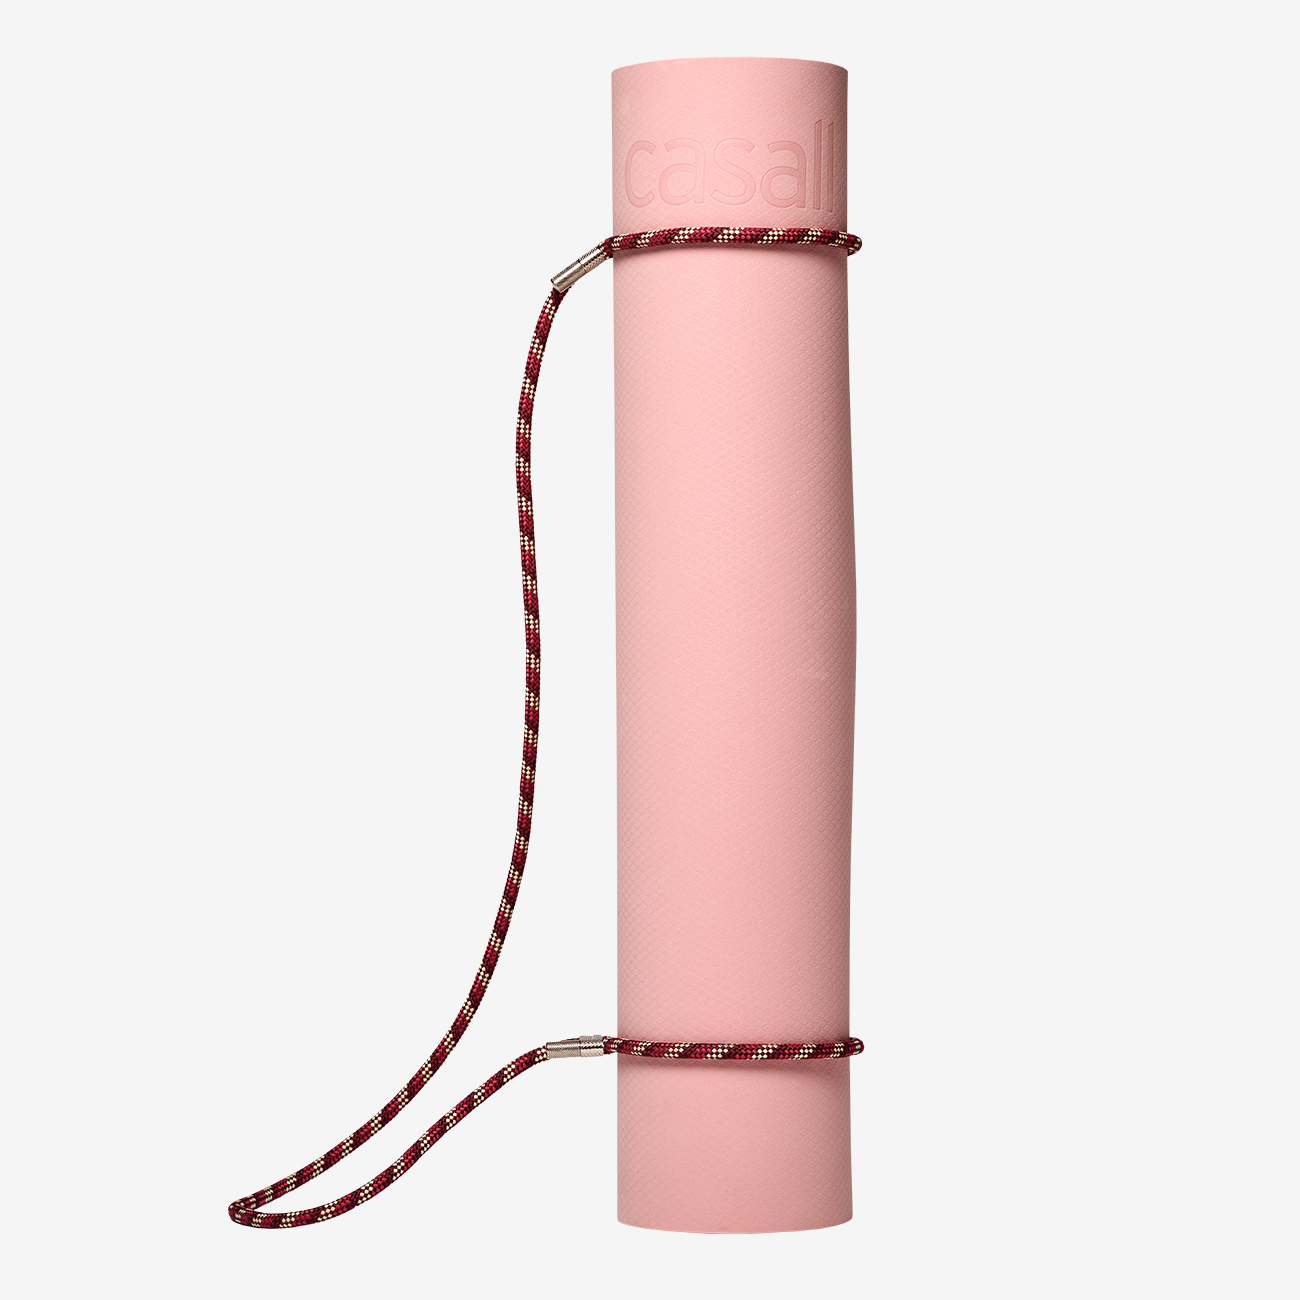 Braided Yoga Carry Strap - Raspberry/Beige, Straps for your yoga mat, Yoga Mat Bags, Yoga, EQUIPMENT & ACCESSORIES